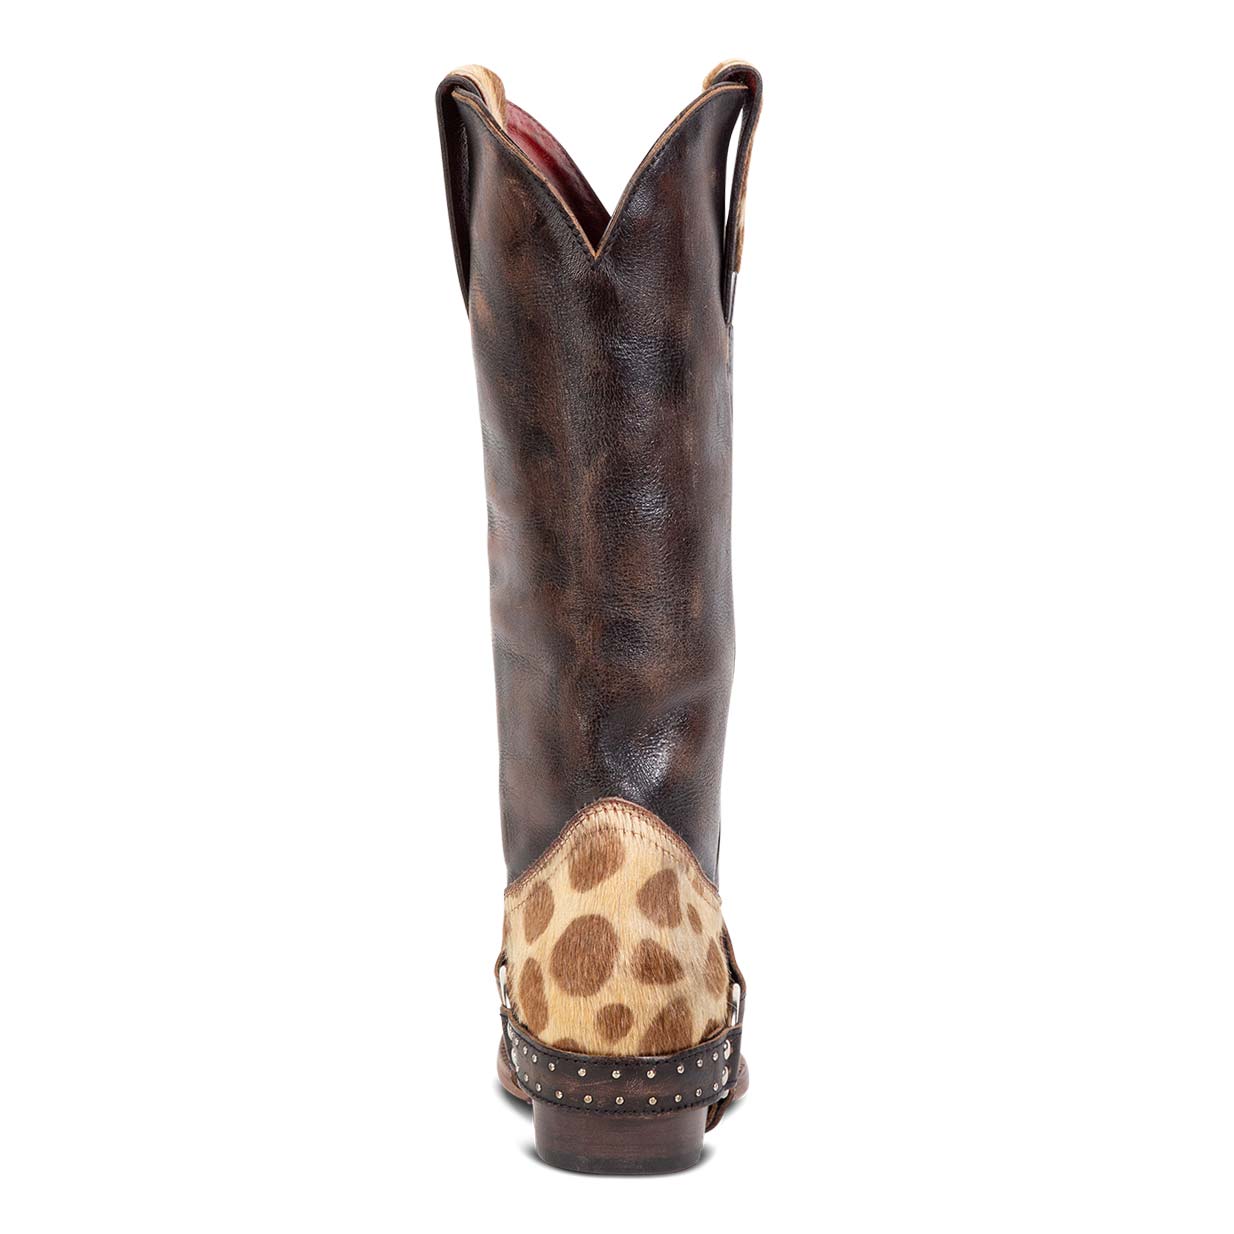 Back view showing scallop dip and embellished leather harness on FREEBIRD women's Lusitano leopard boot